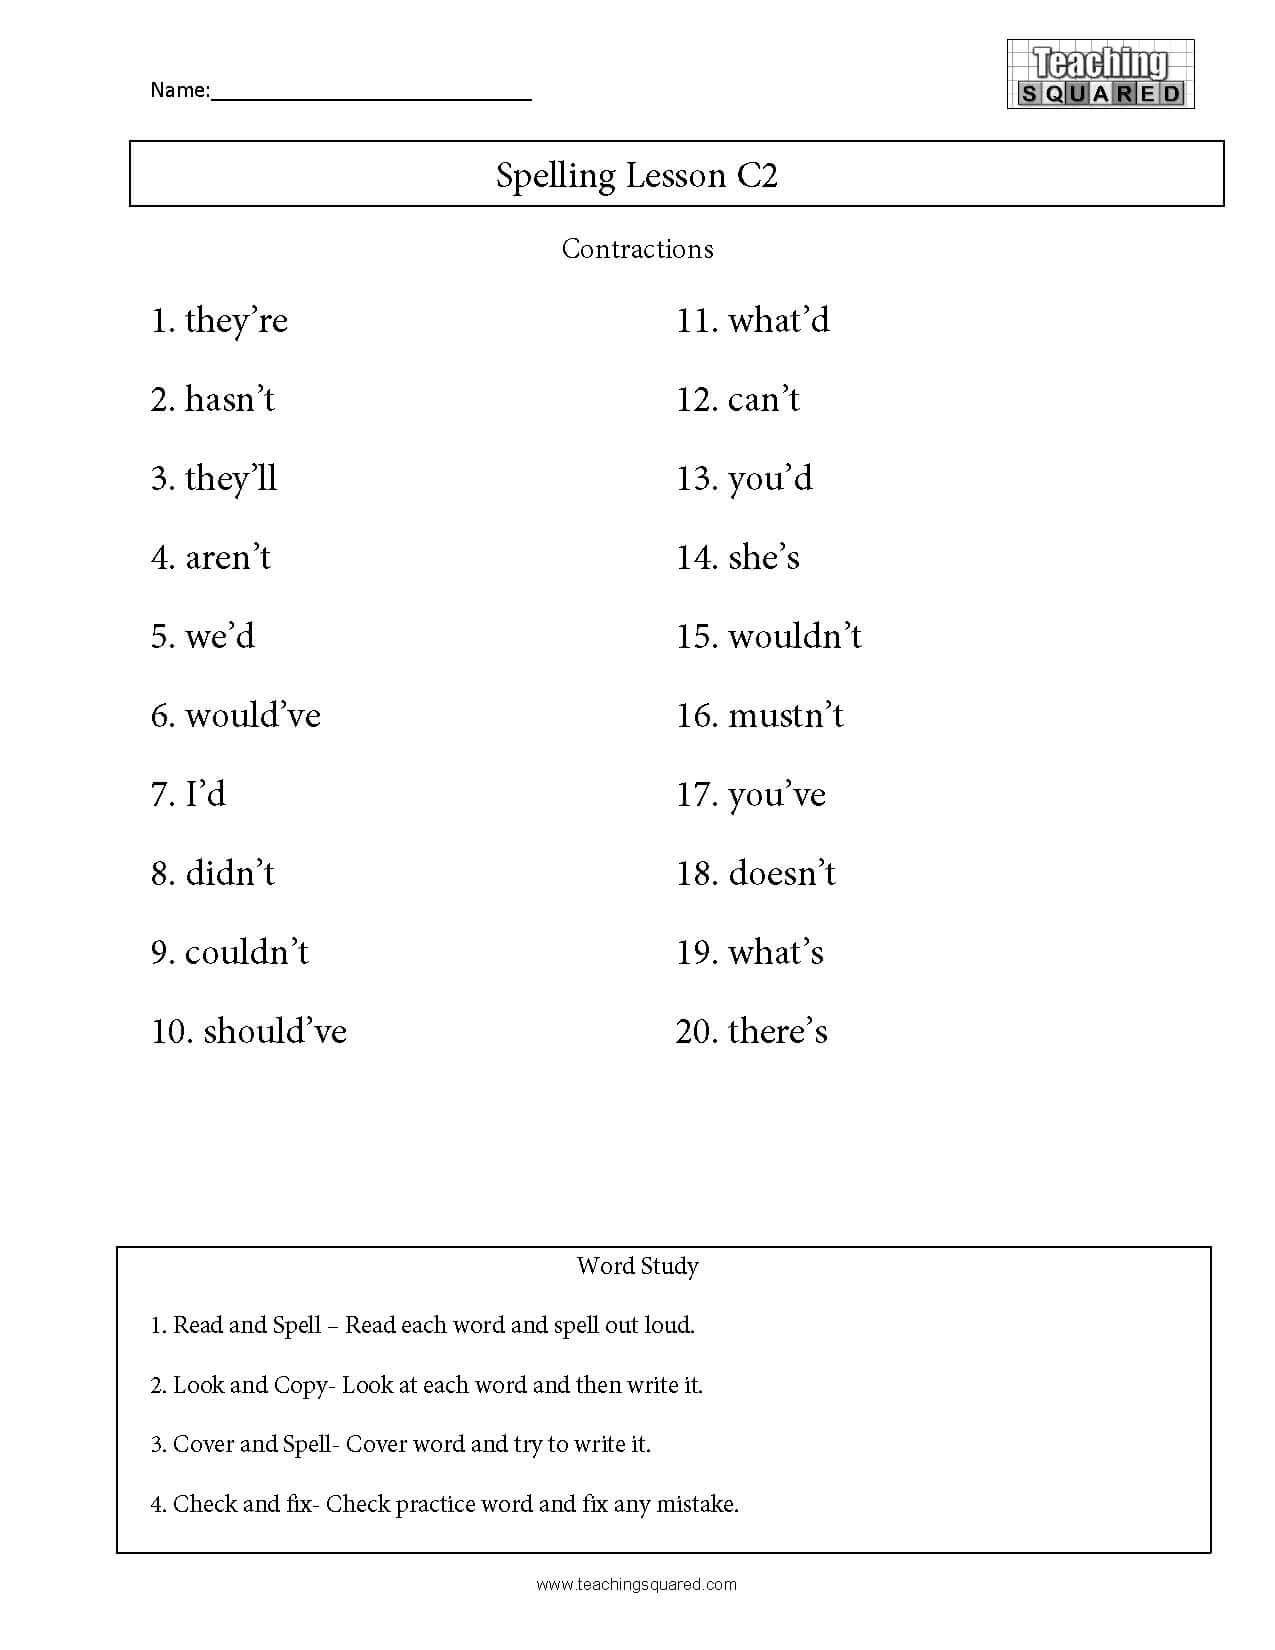 Spelling List C20- Contractions - Teaching Squared Regarding Contractions Worksheet 3rd Grade